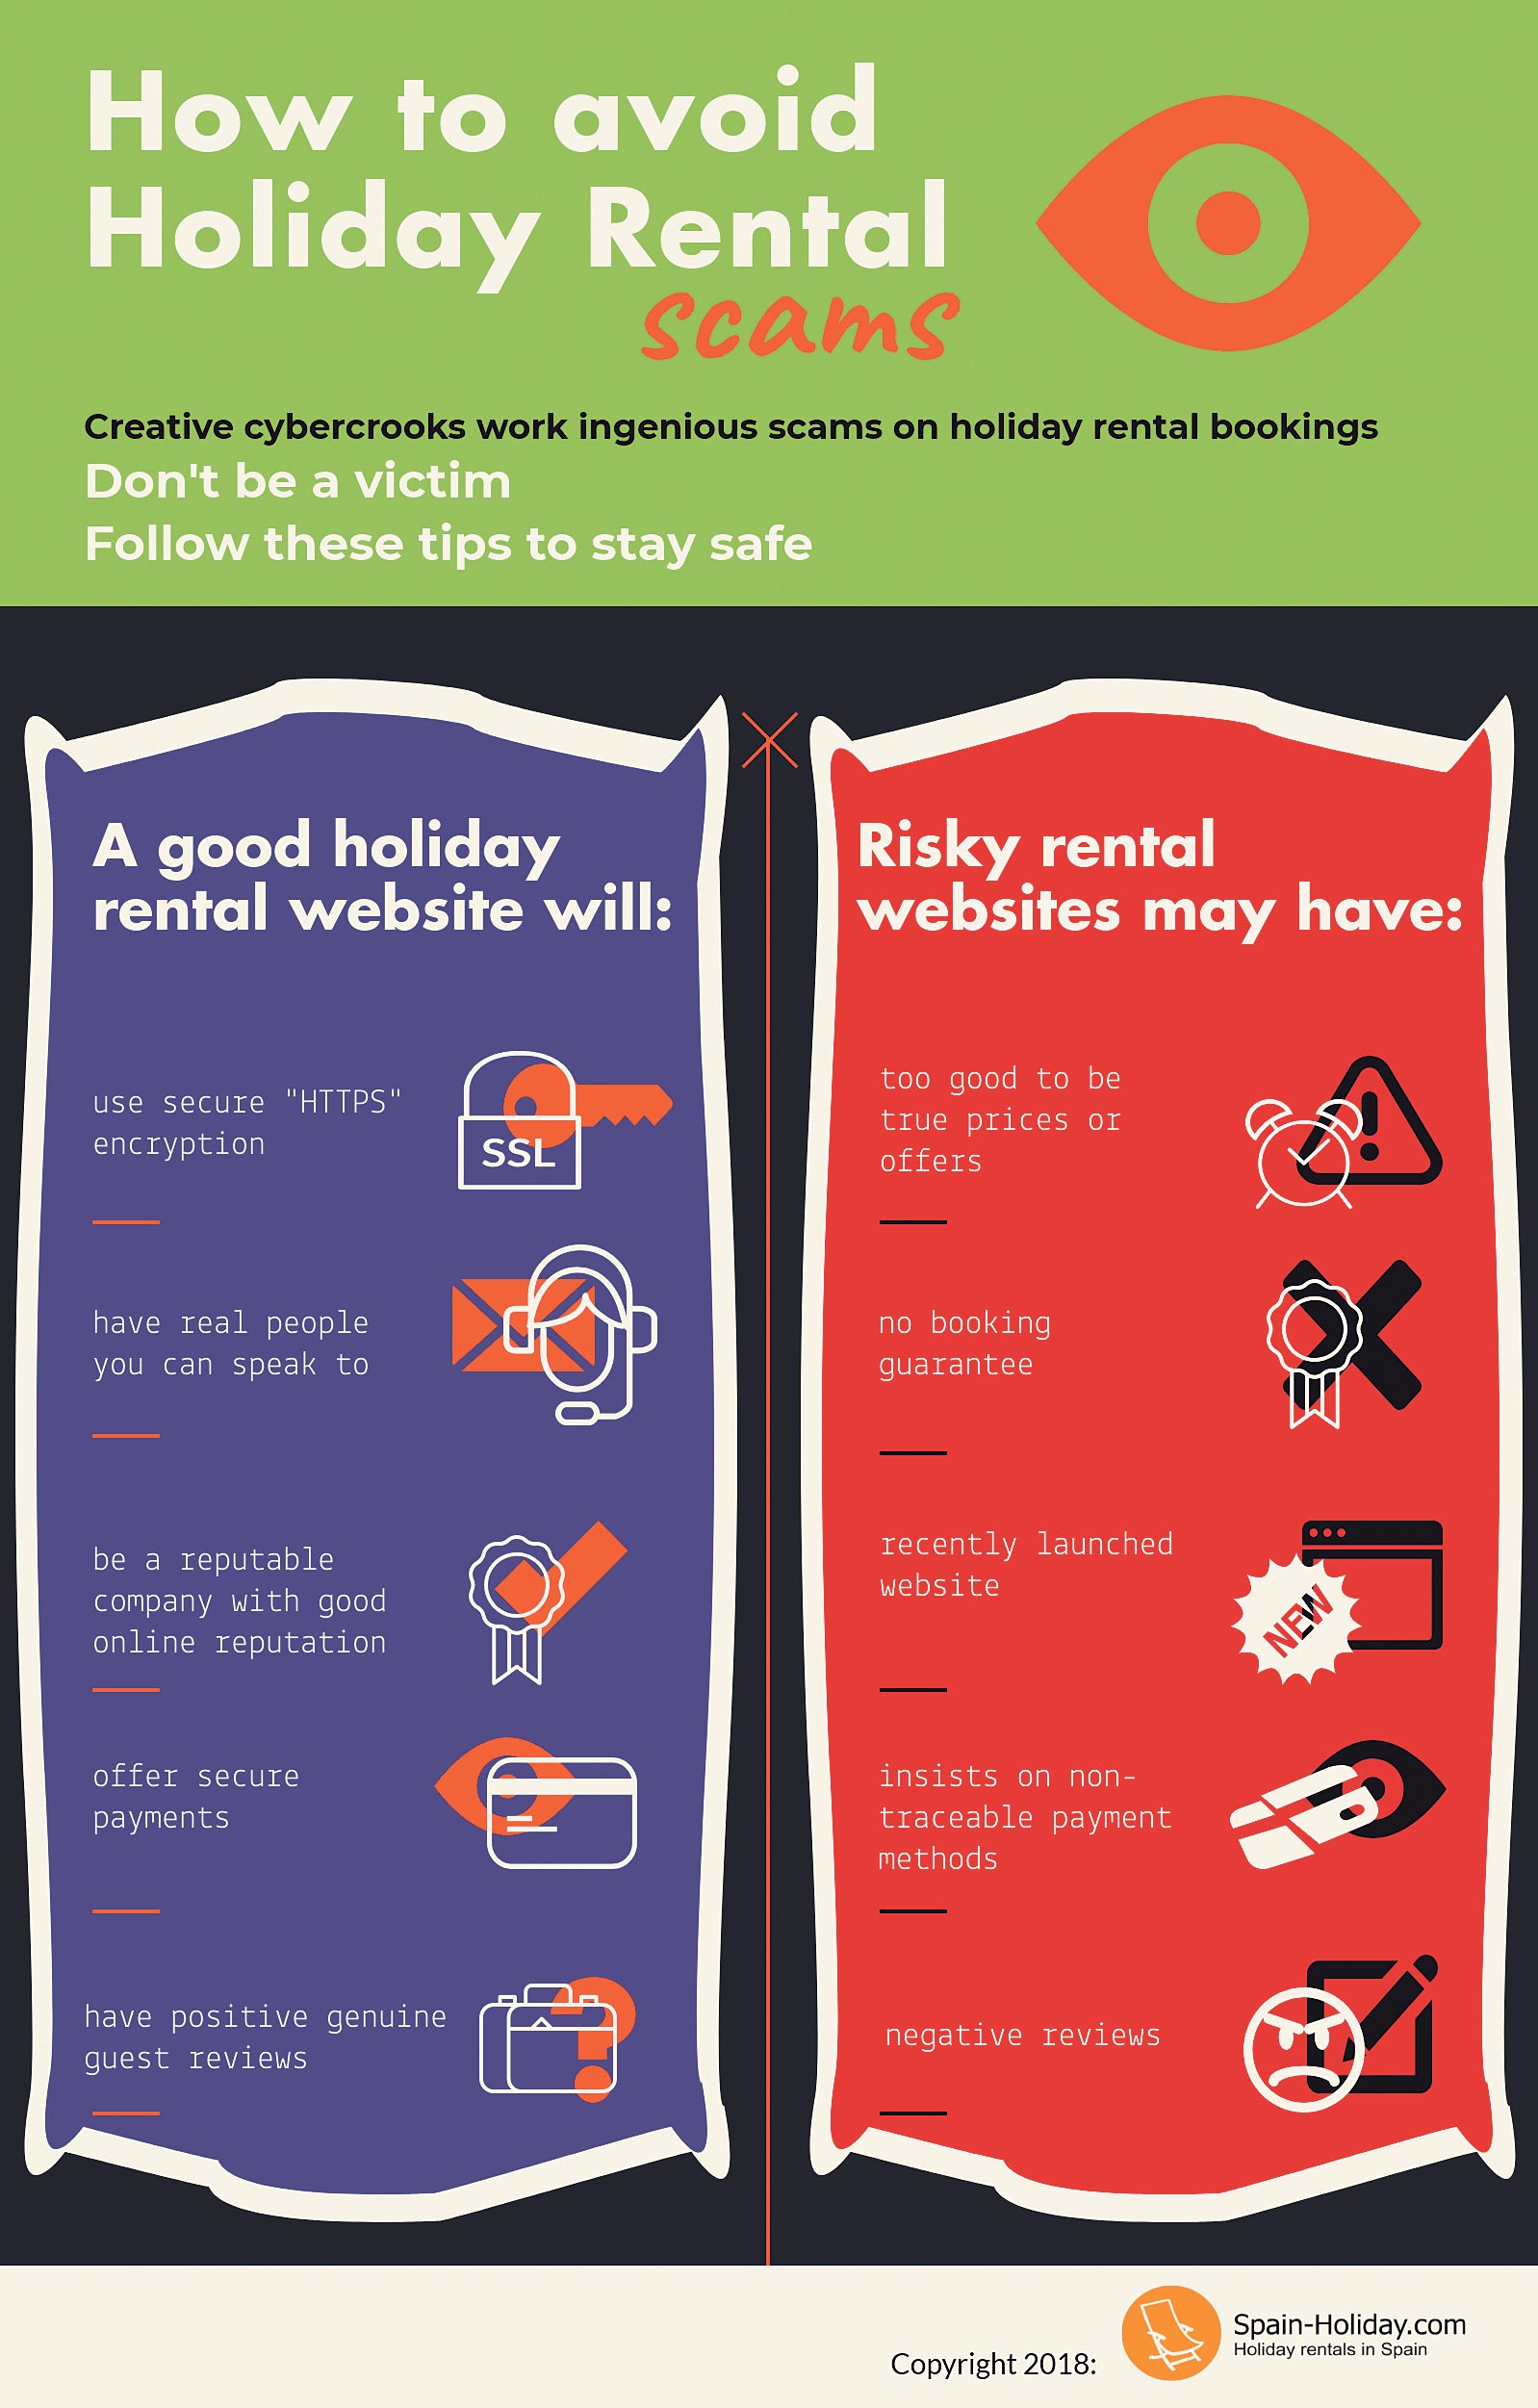 How-to-avoid-holiday-rental-scamsfull.jpg